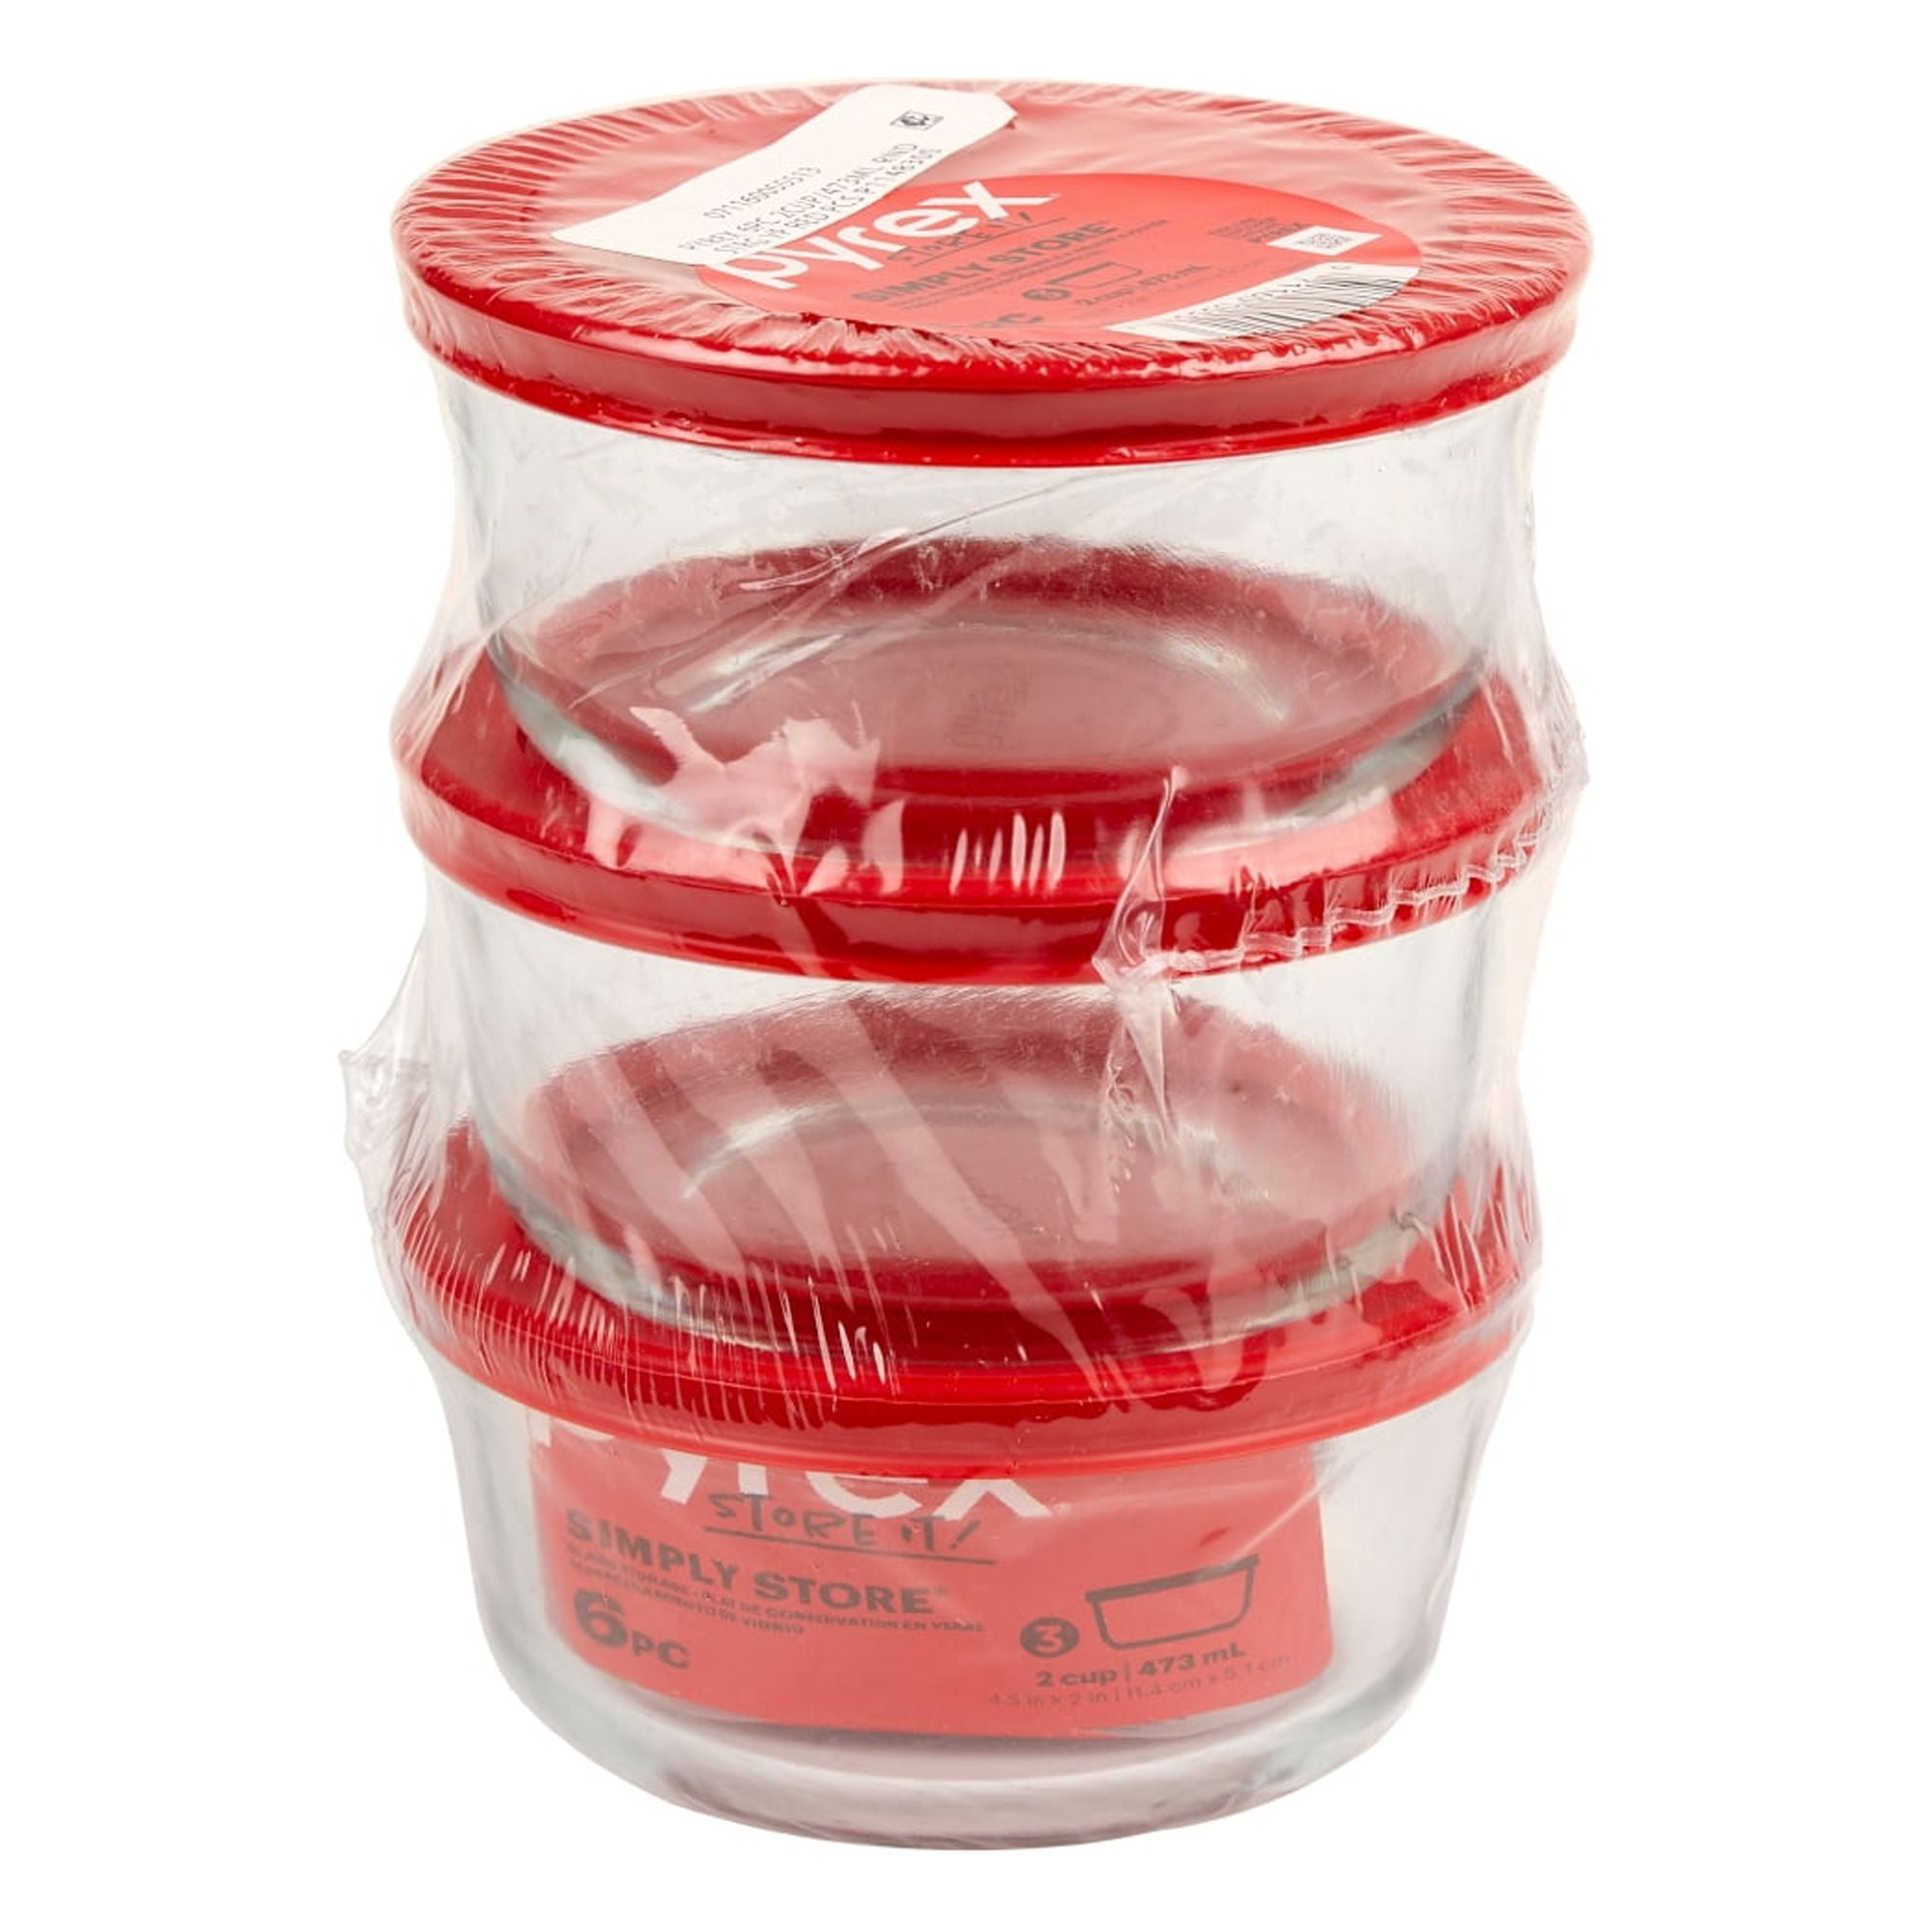 Pyrex Simply Store 2-Cup Glass Food Storage Container, Round, Set of 3